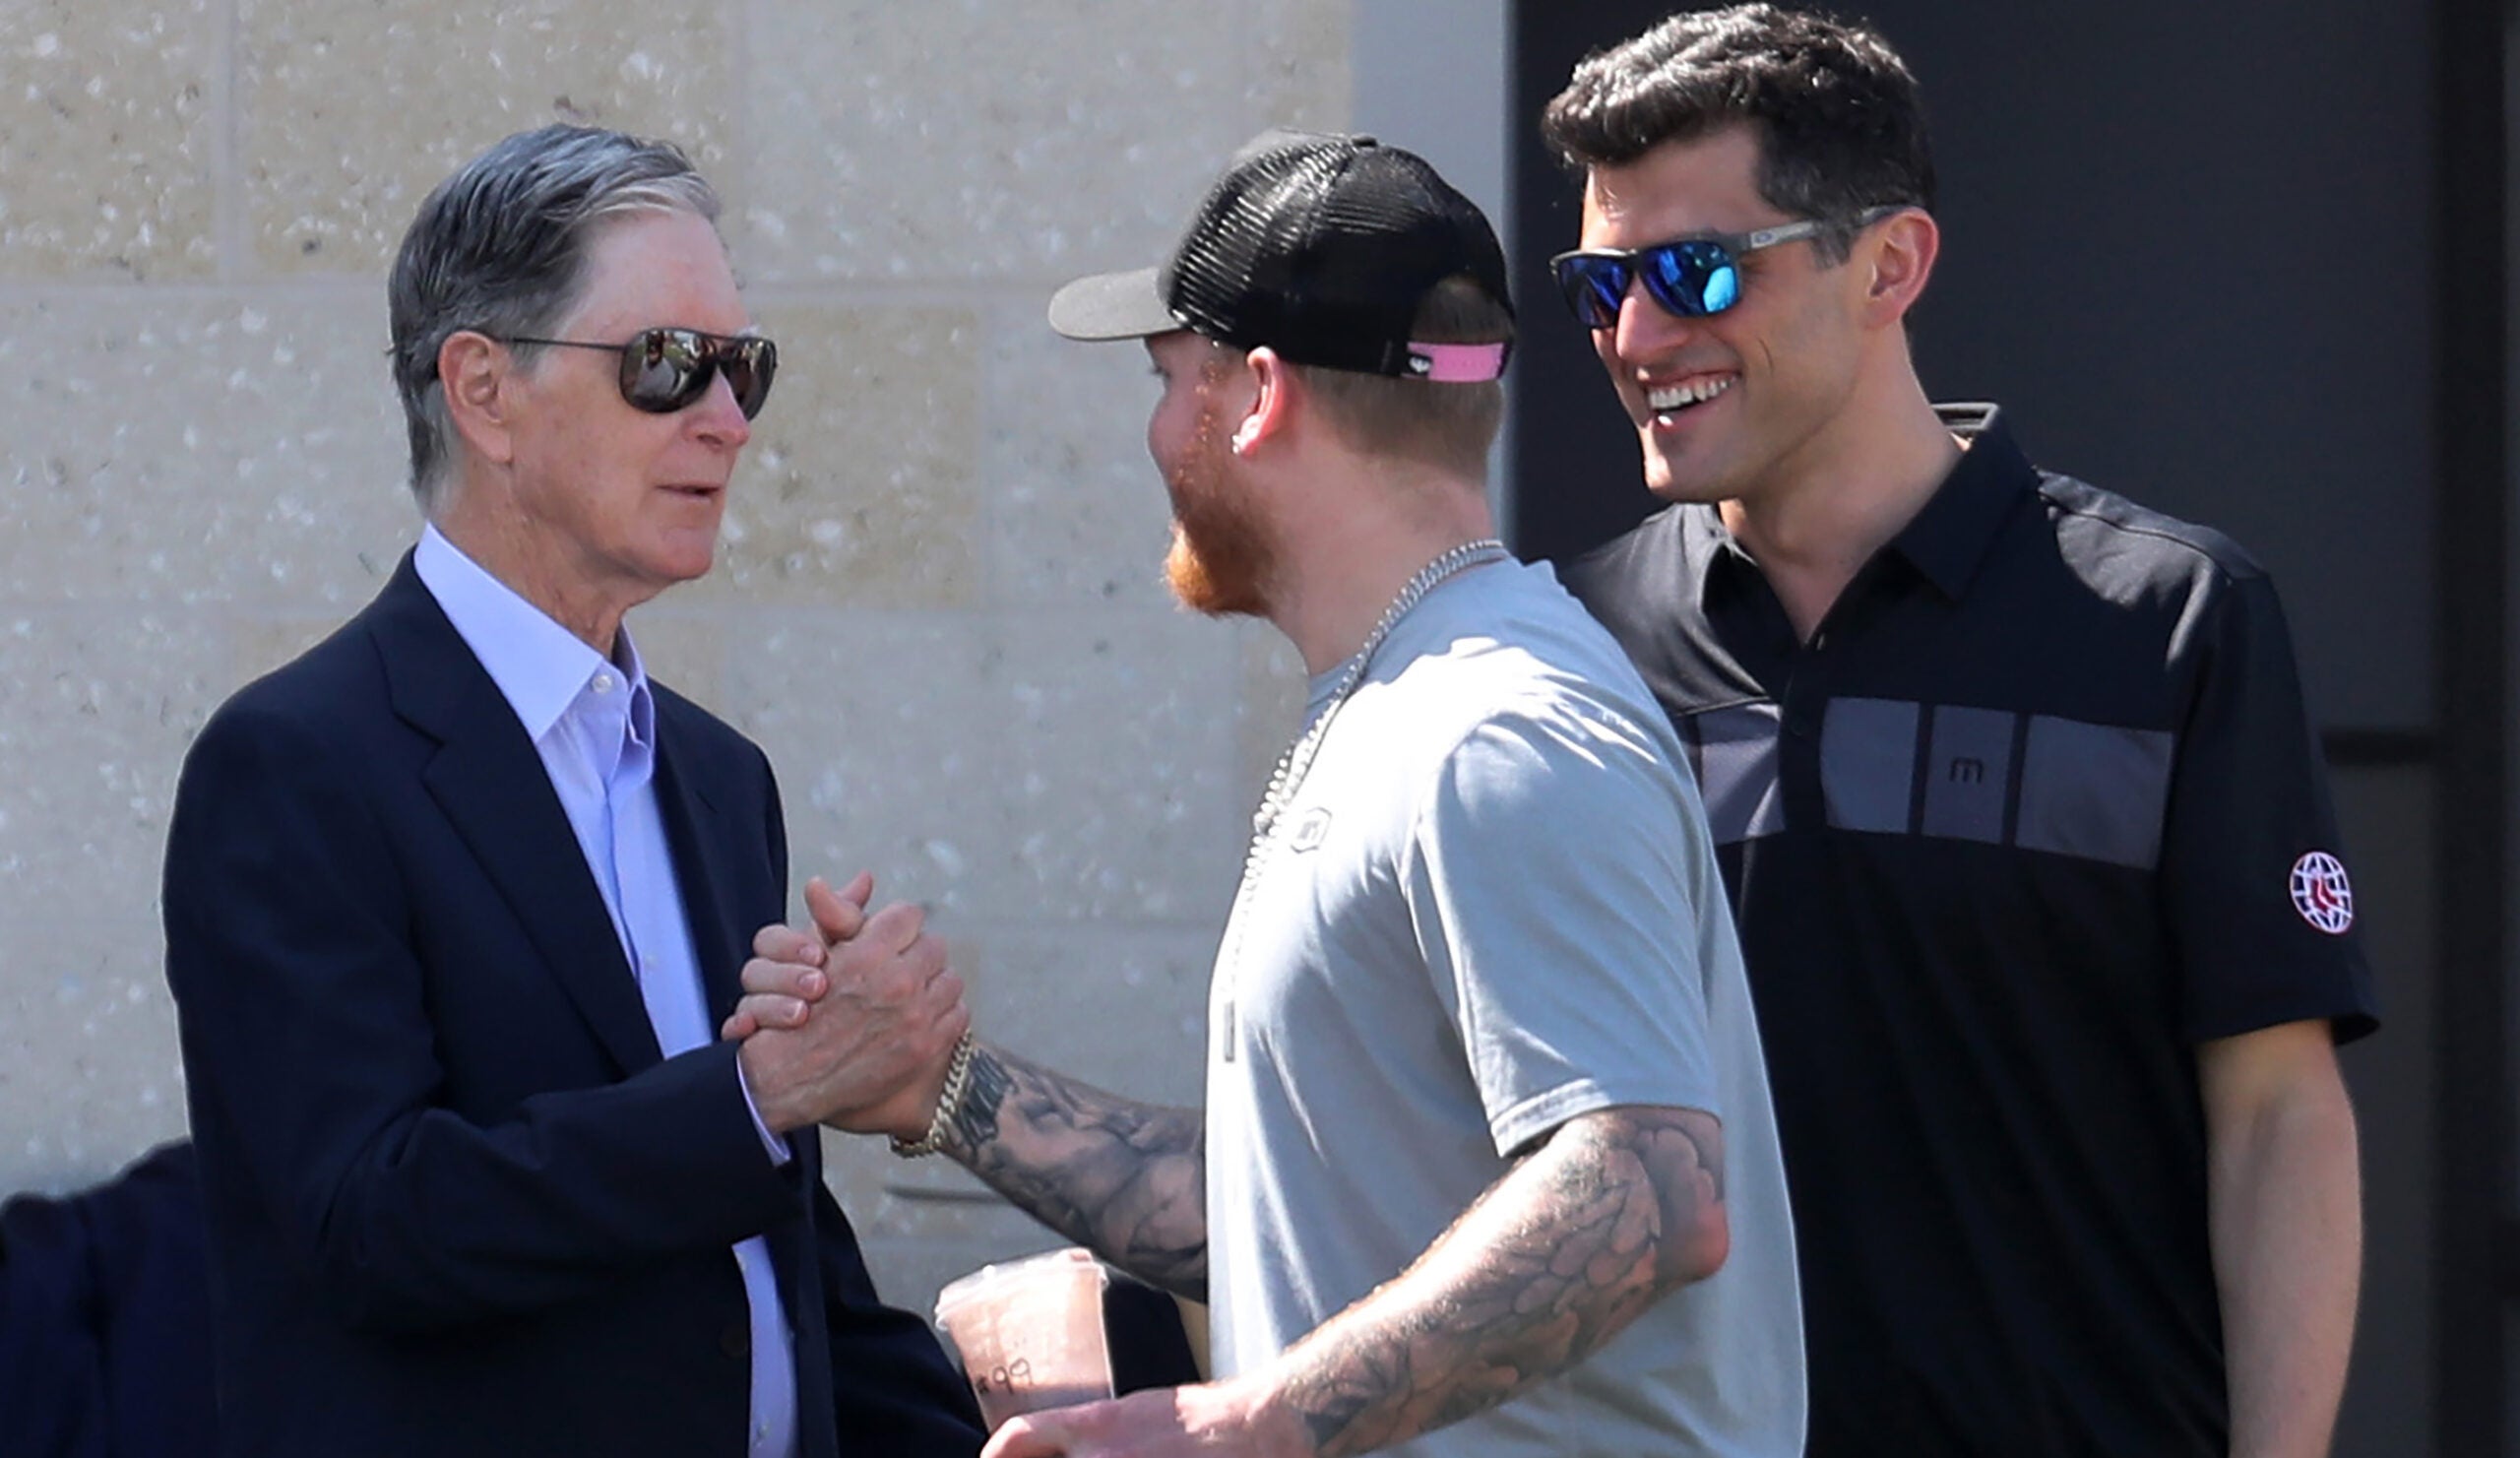 Red Sox principal owner John Henry (left) and now former chief baseball officer Chaim Bloom greet Alex Verdugo during Spring Training.